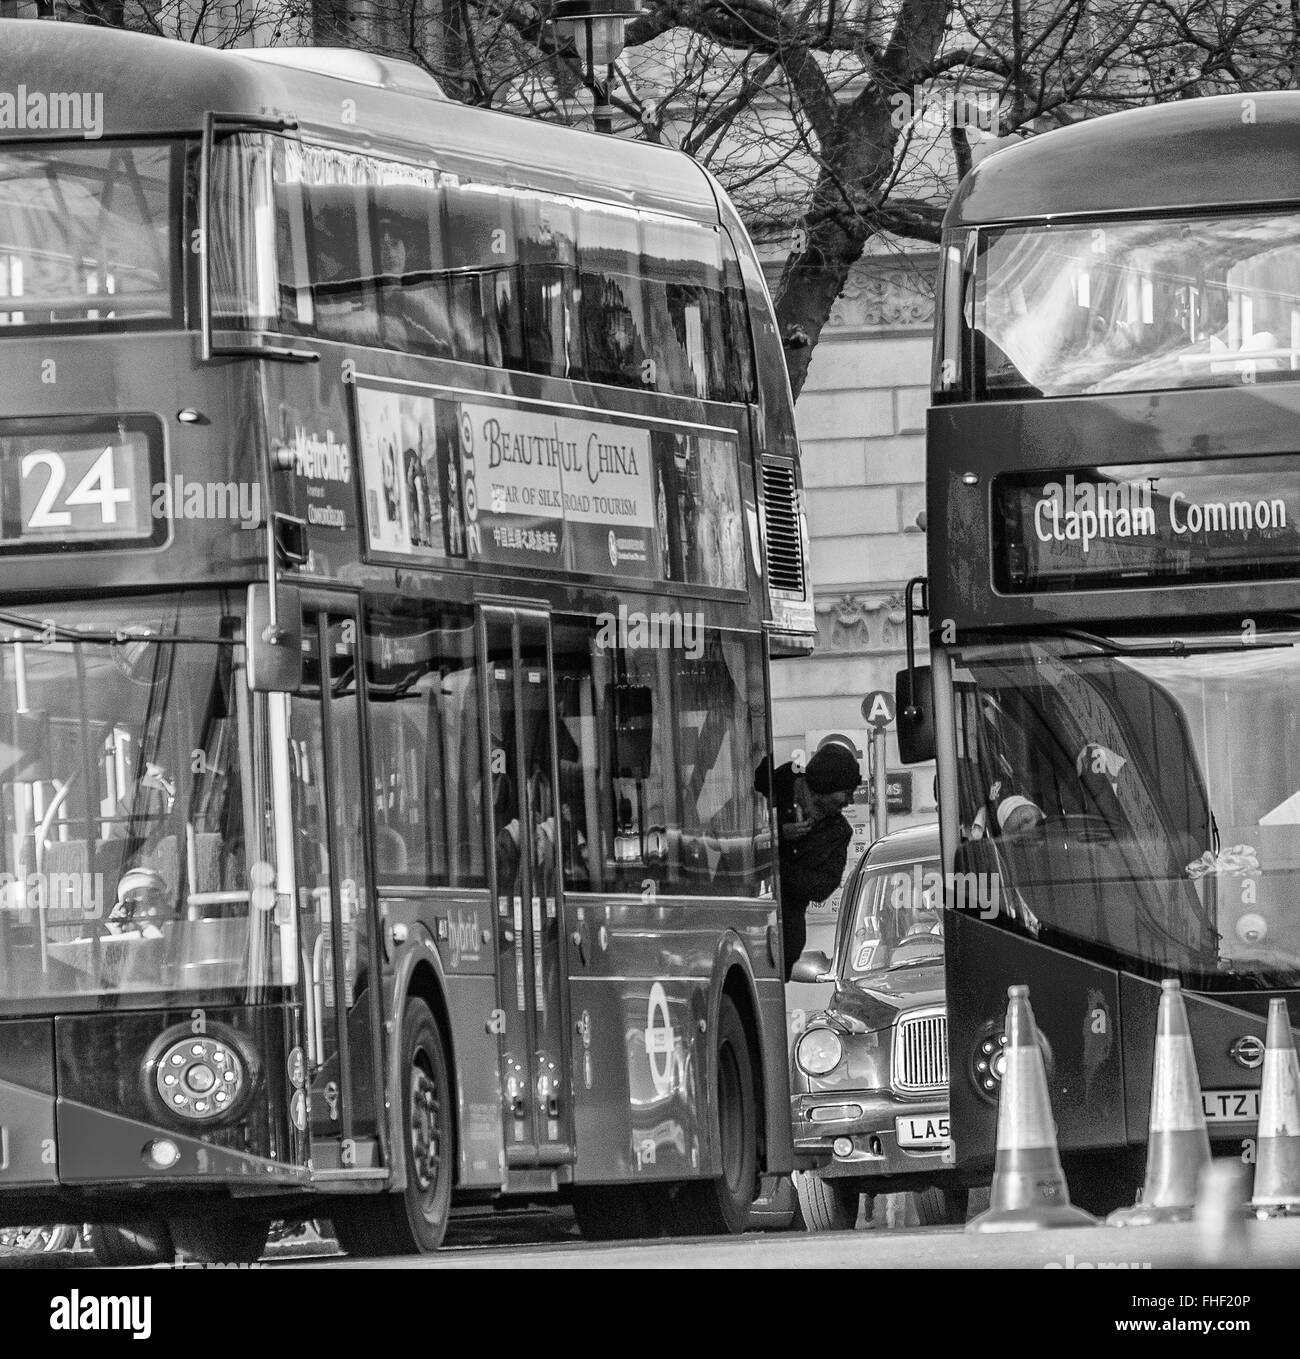 Man leaning out of London bus Stock Photo